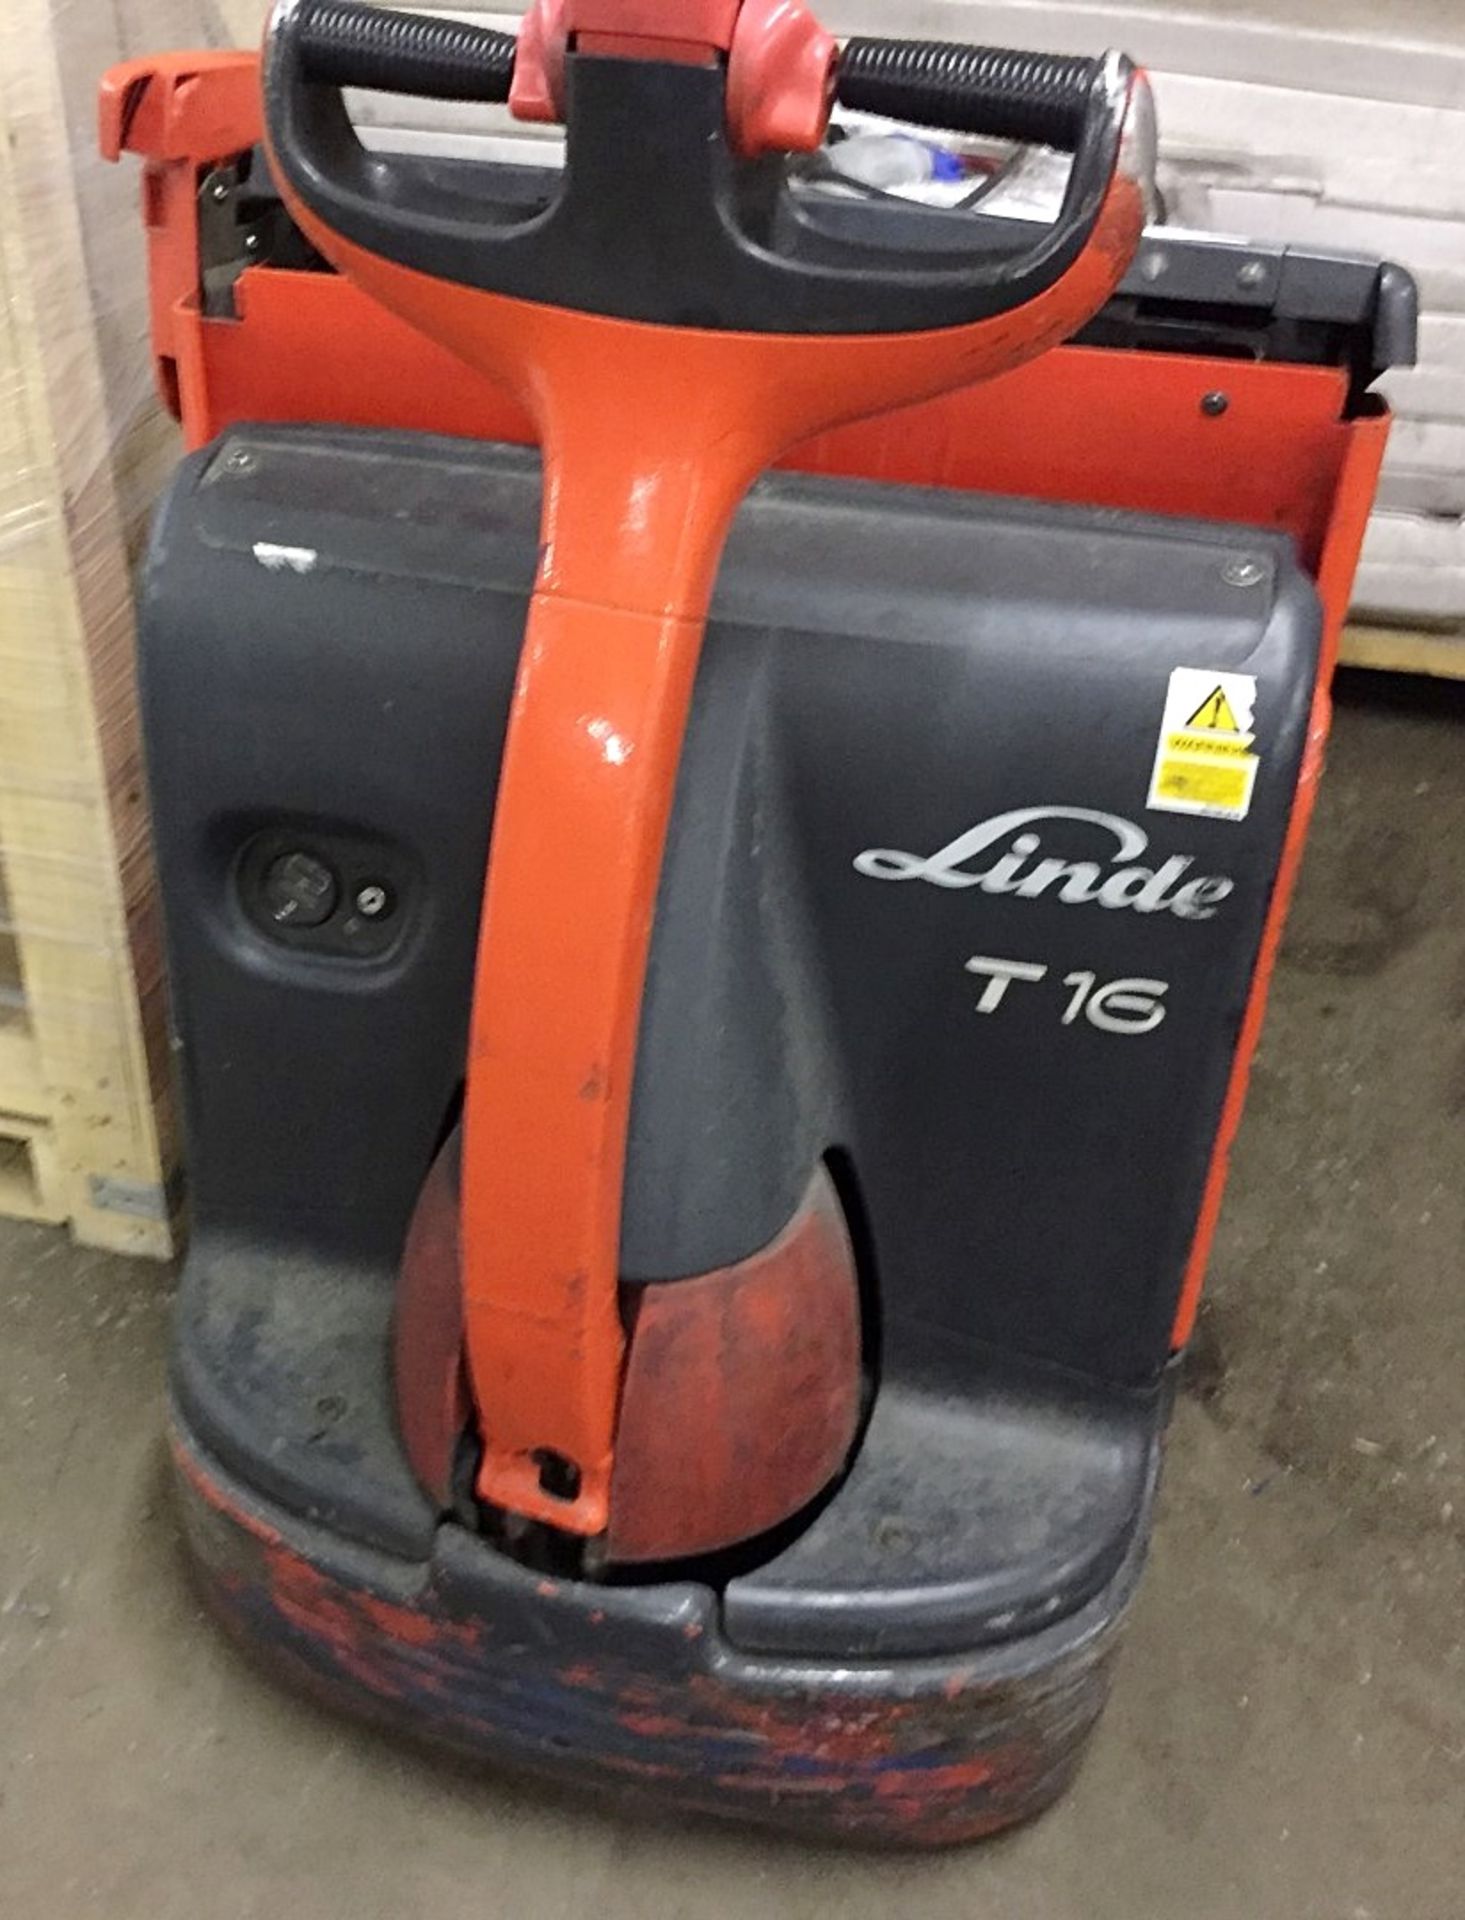 1 x Linde T16 Electric Pallet Truck - 1600kg Capacity - Tested and Working - Key and Charger - Image 2 of 3